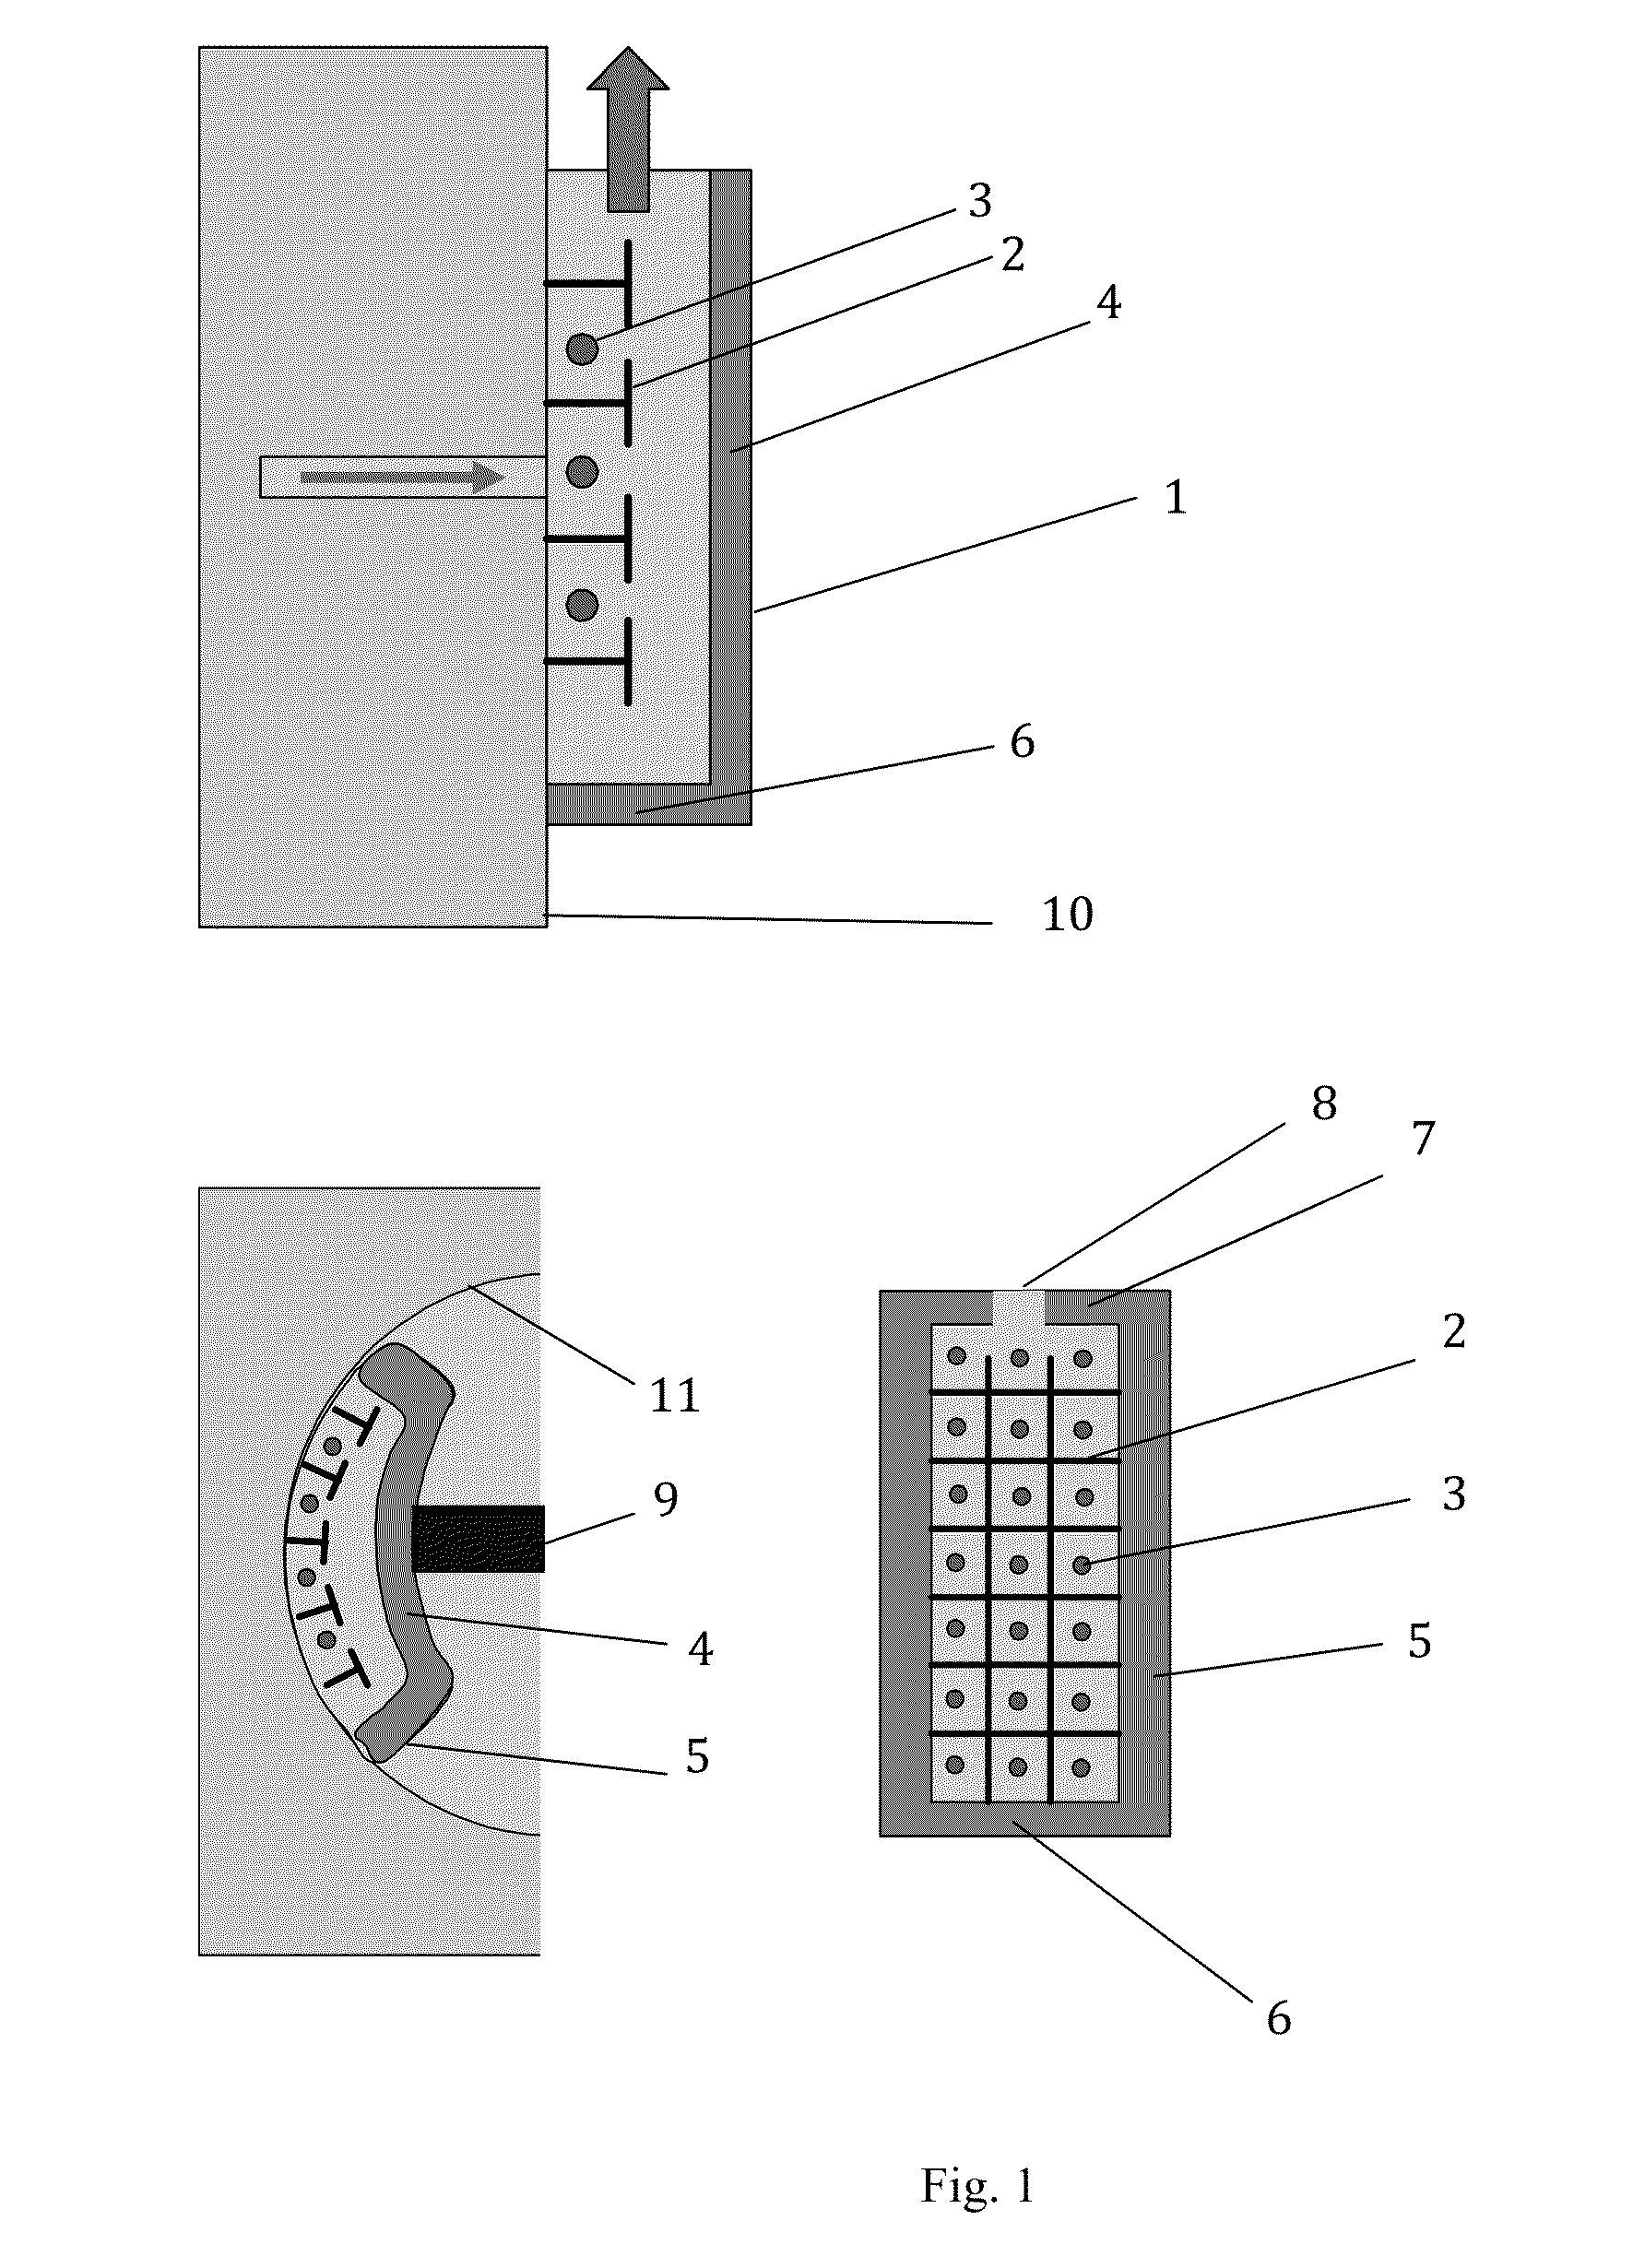 Method for determining the profile of an inflow and the parameters of a well-surrounding area in a multipay well